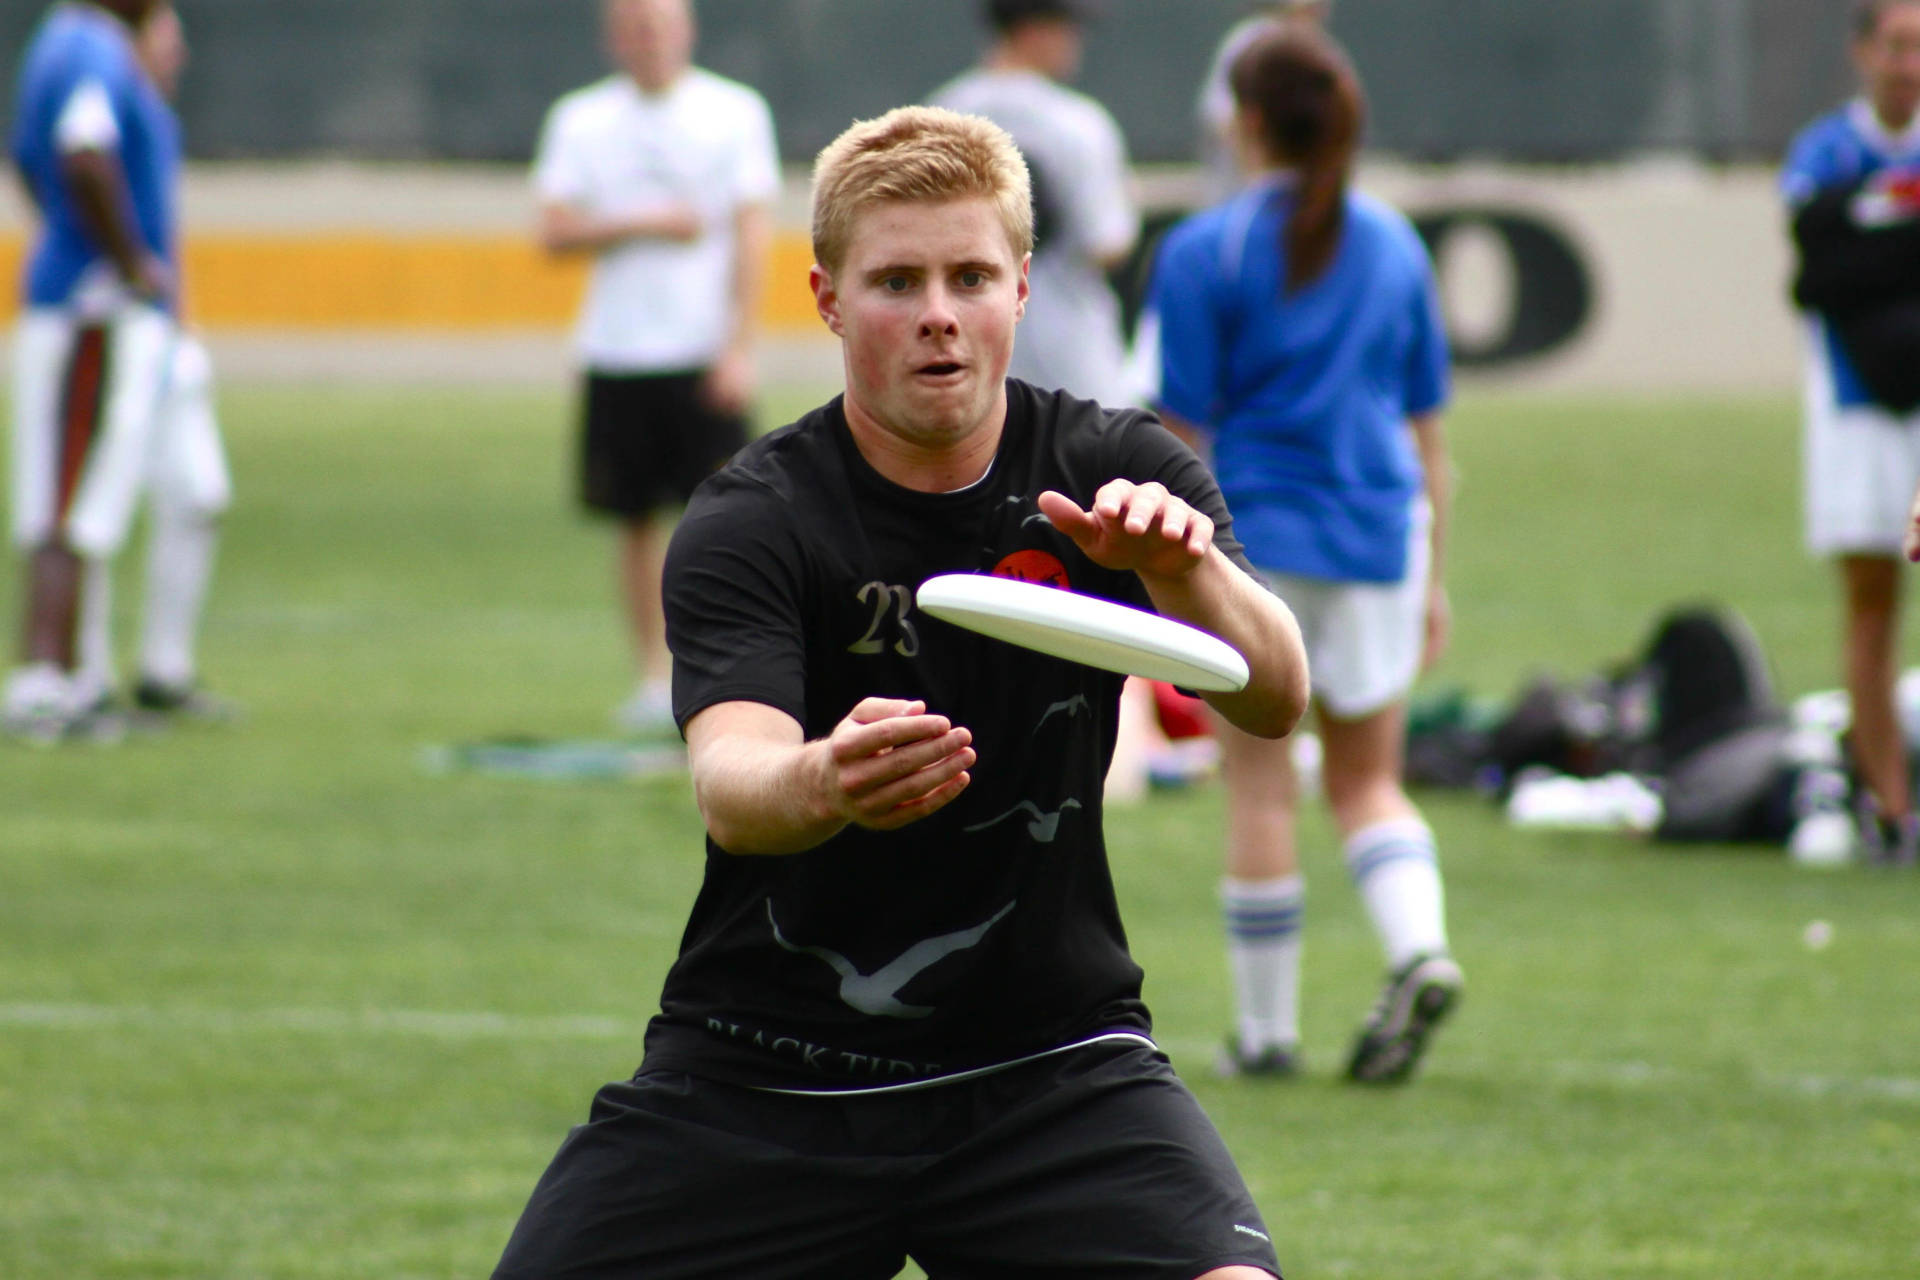 Ultimate Frisbee 4196X2797 Wallpaper and Background Image